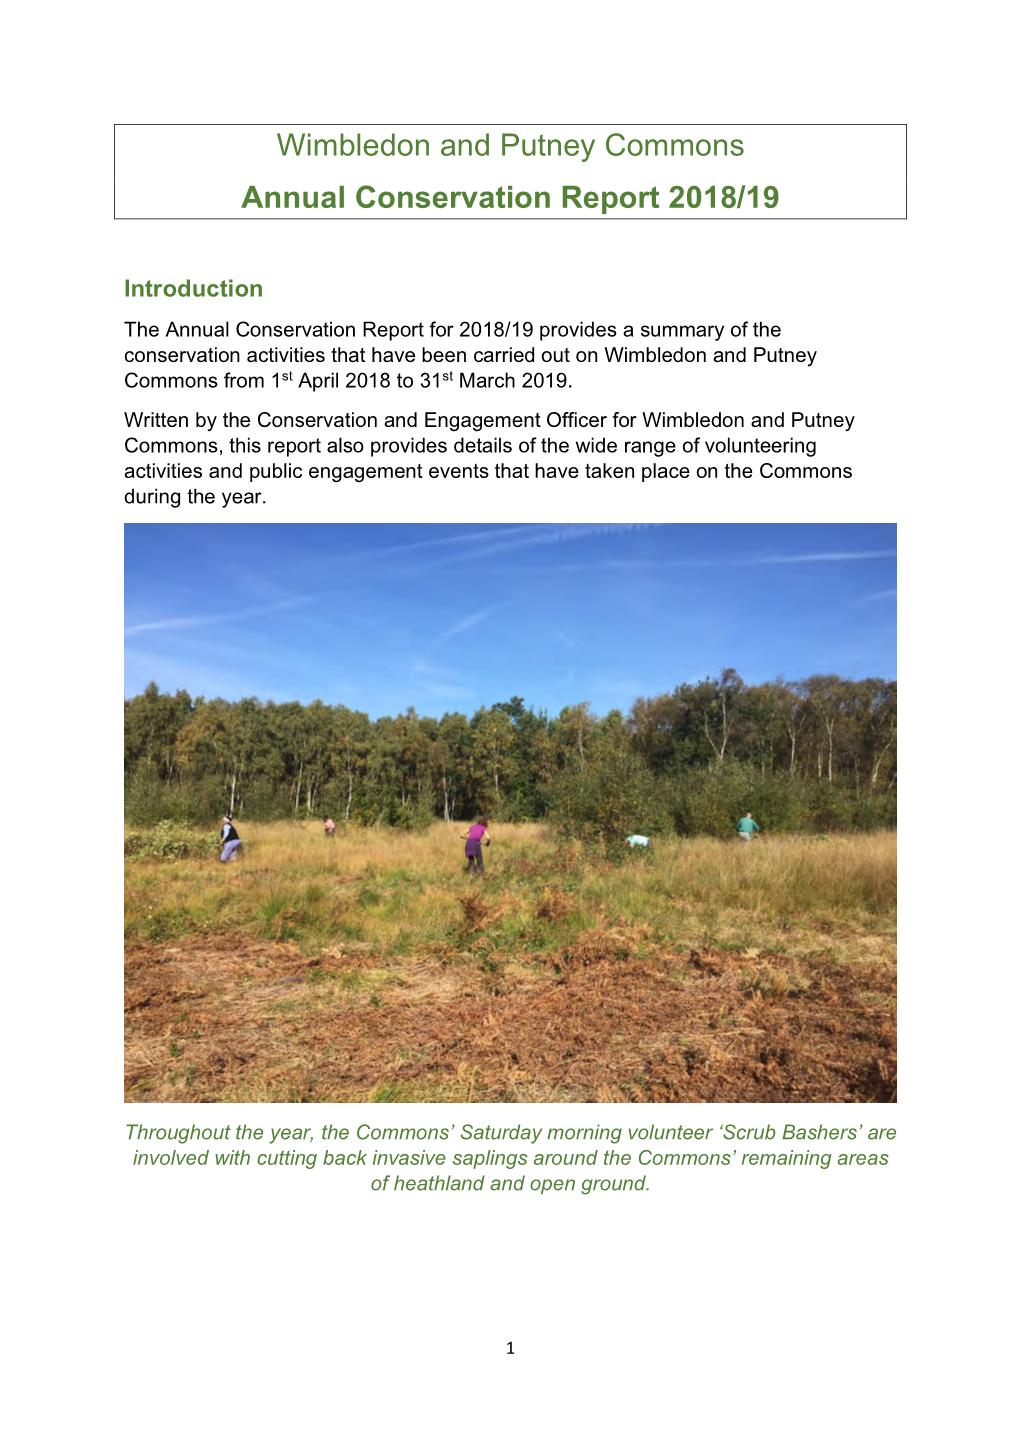 Wimbledon and Putney Commons Annual Conservation Report 2018/19